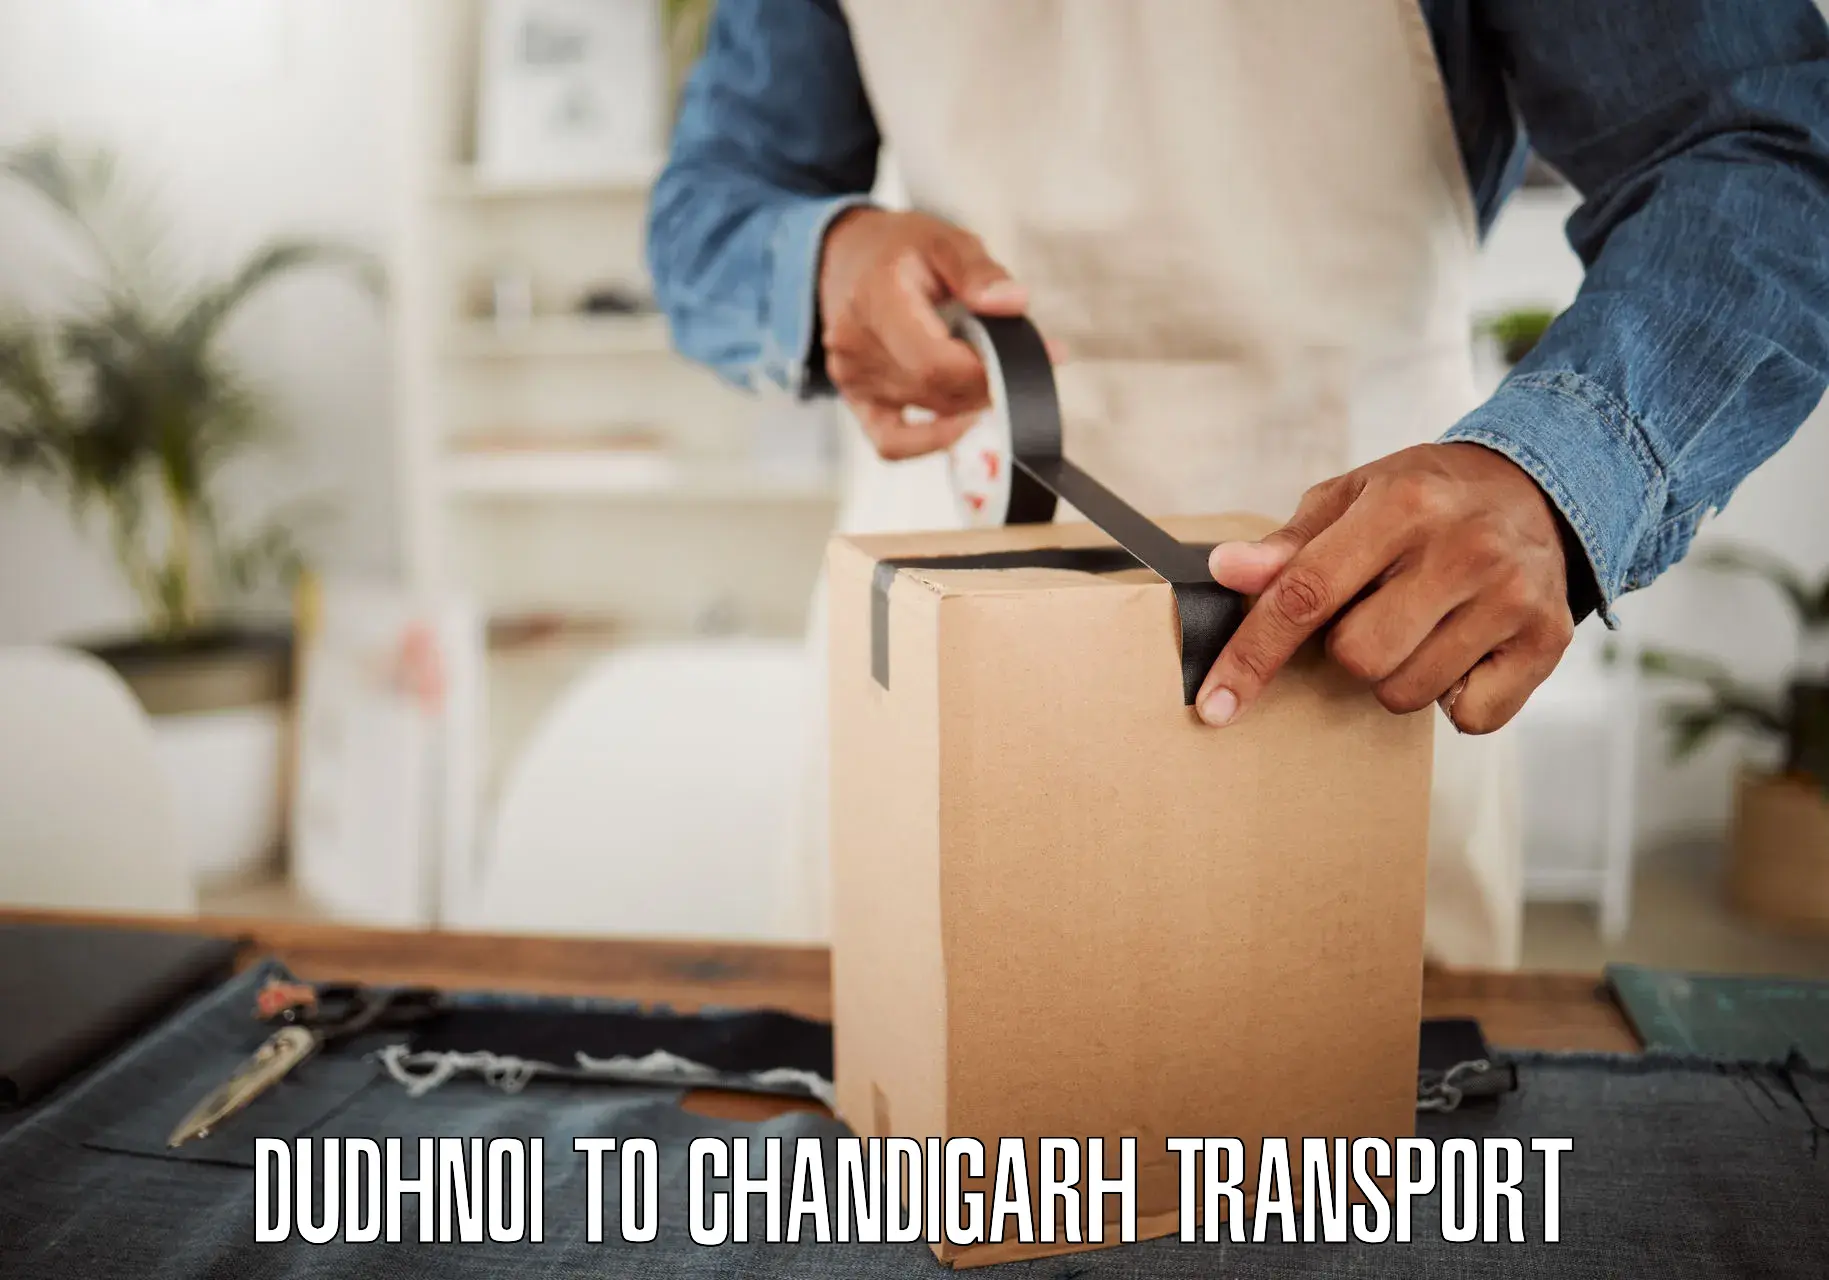 Domestic transport services Dudhnoi to Chandigarh